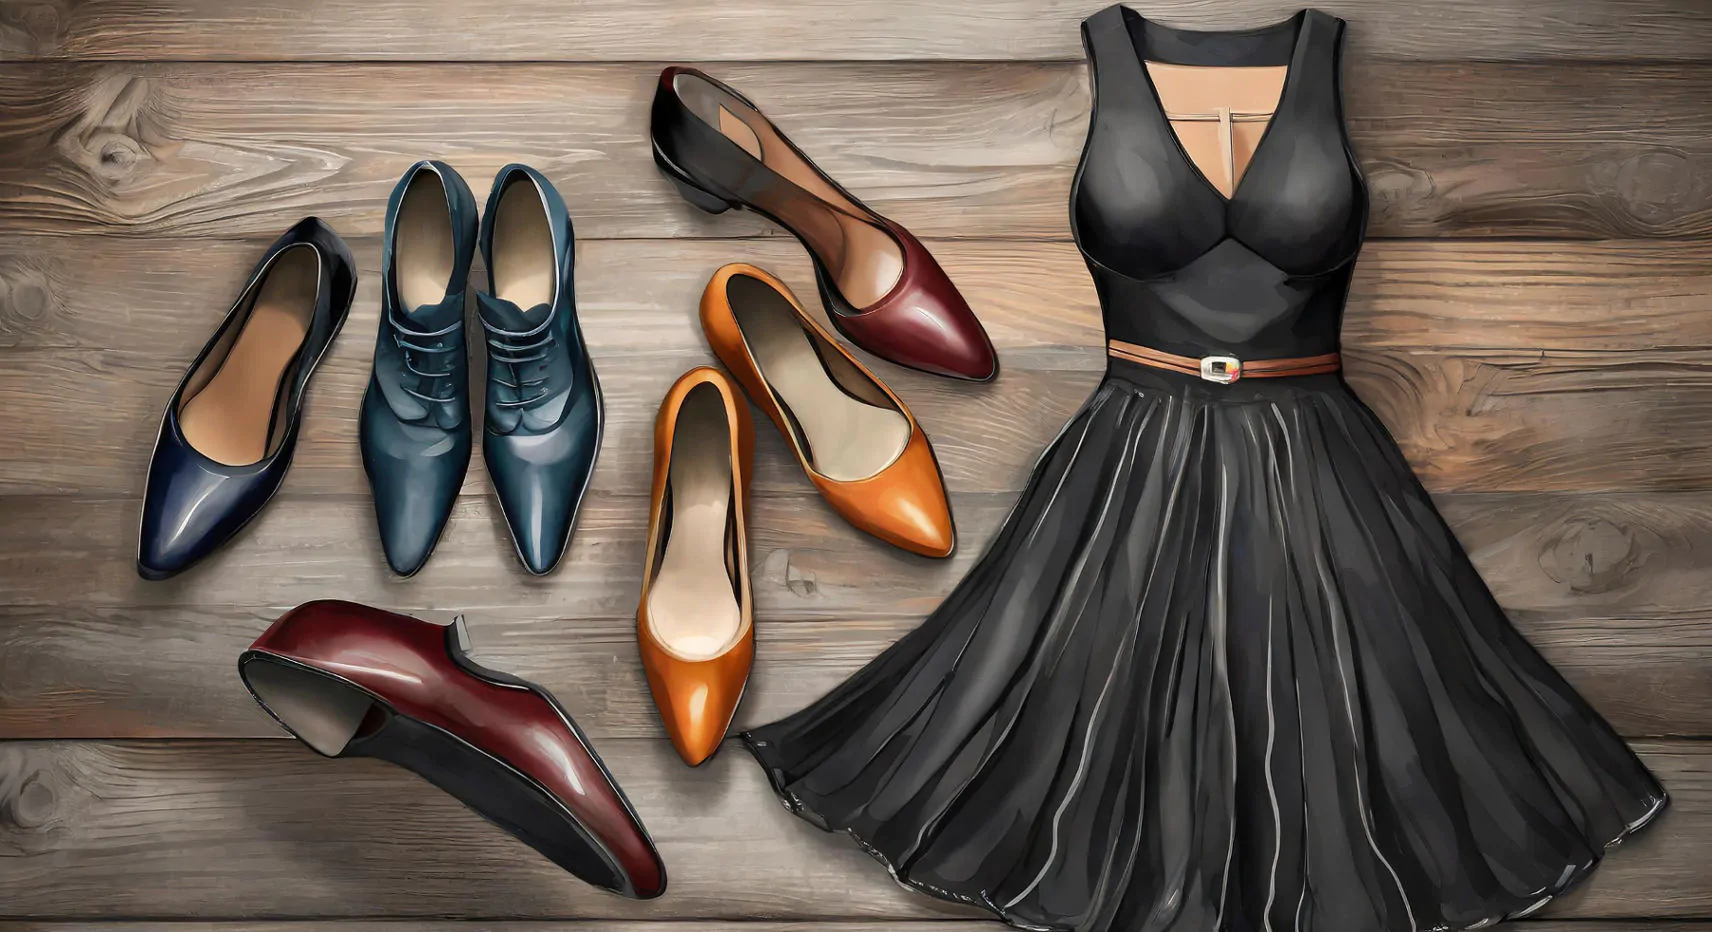 What Color Shoes To Wear With Black Dress